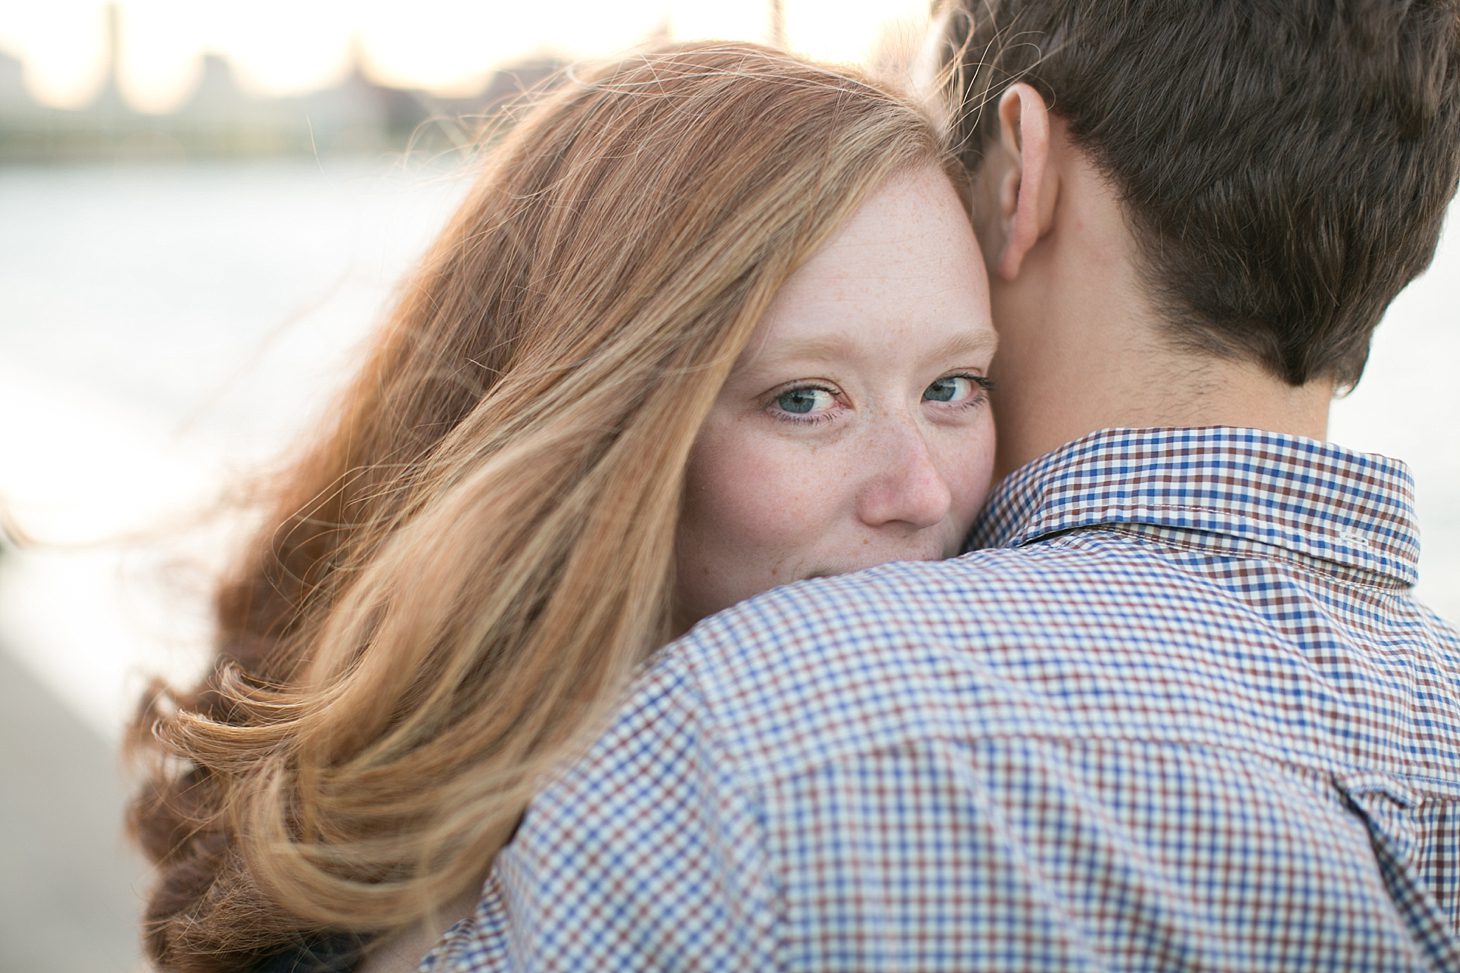 Downtown Chicago Engagement by Christy Tyler Photography_0018